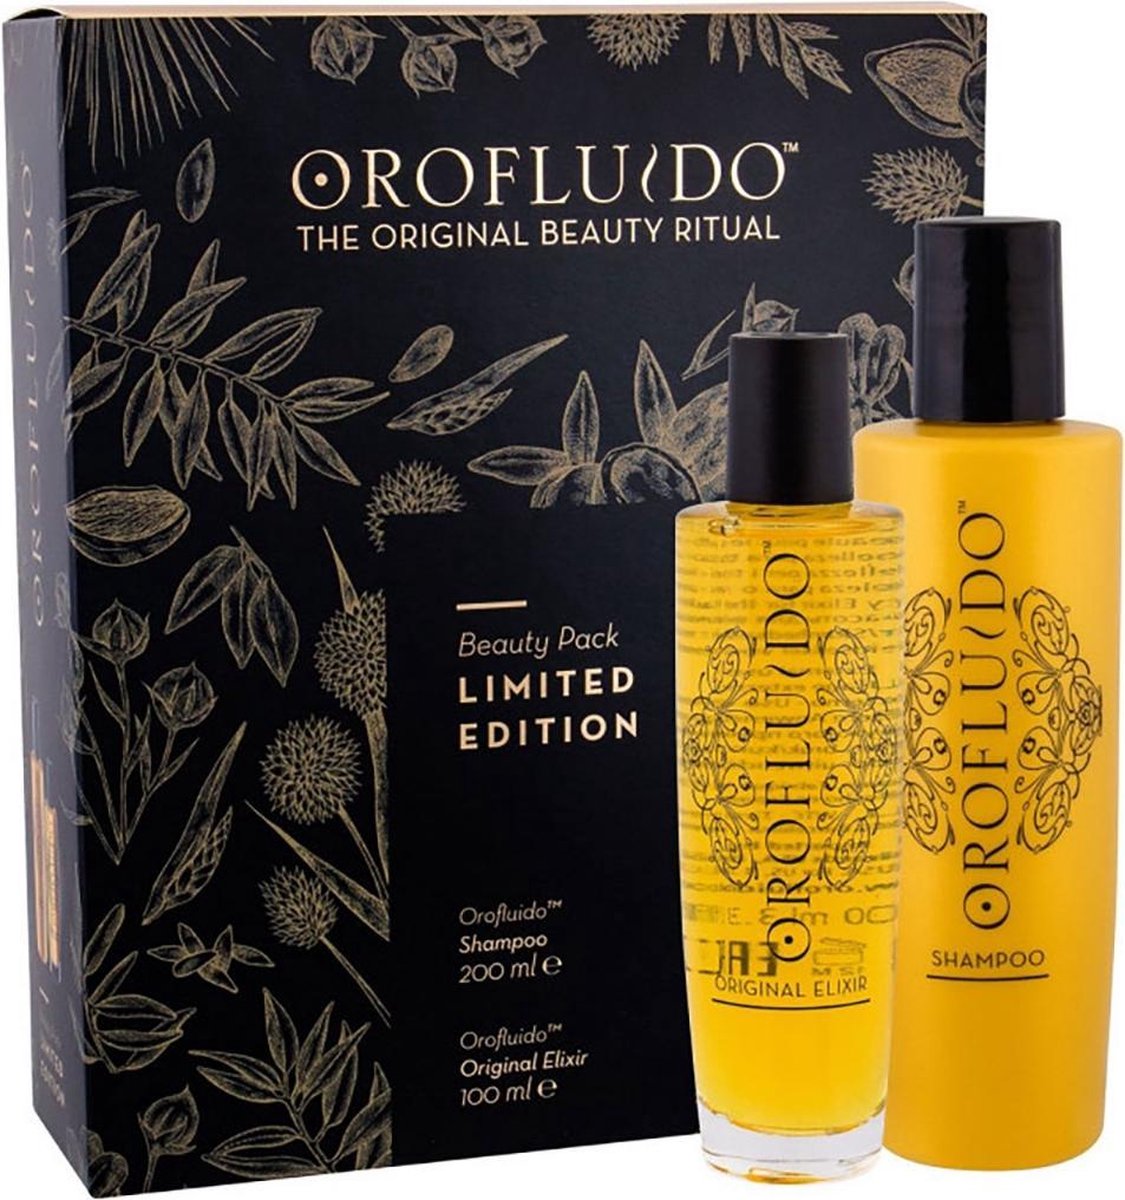 Orofluido Beauty Pack Shampooing Édition Limited 200 ml Set 2 Pieces 2019 |  bol